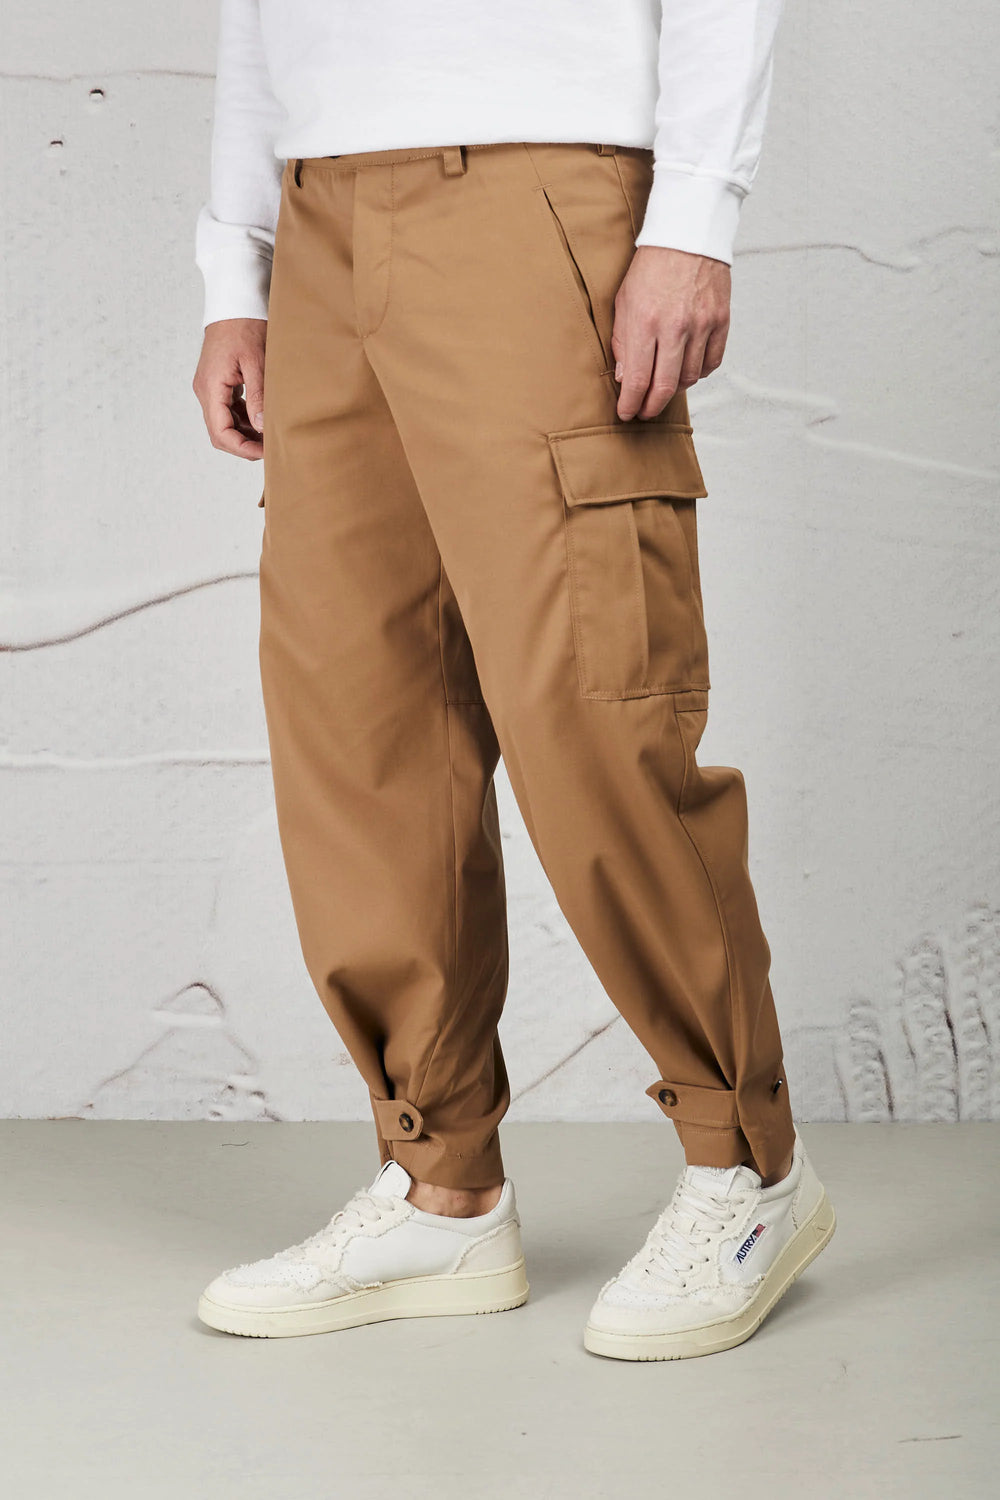 PT Torino Trousers: The Elegance of an Online Man